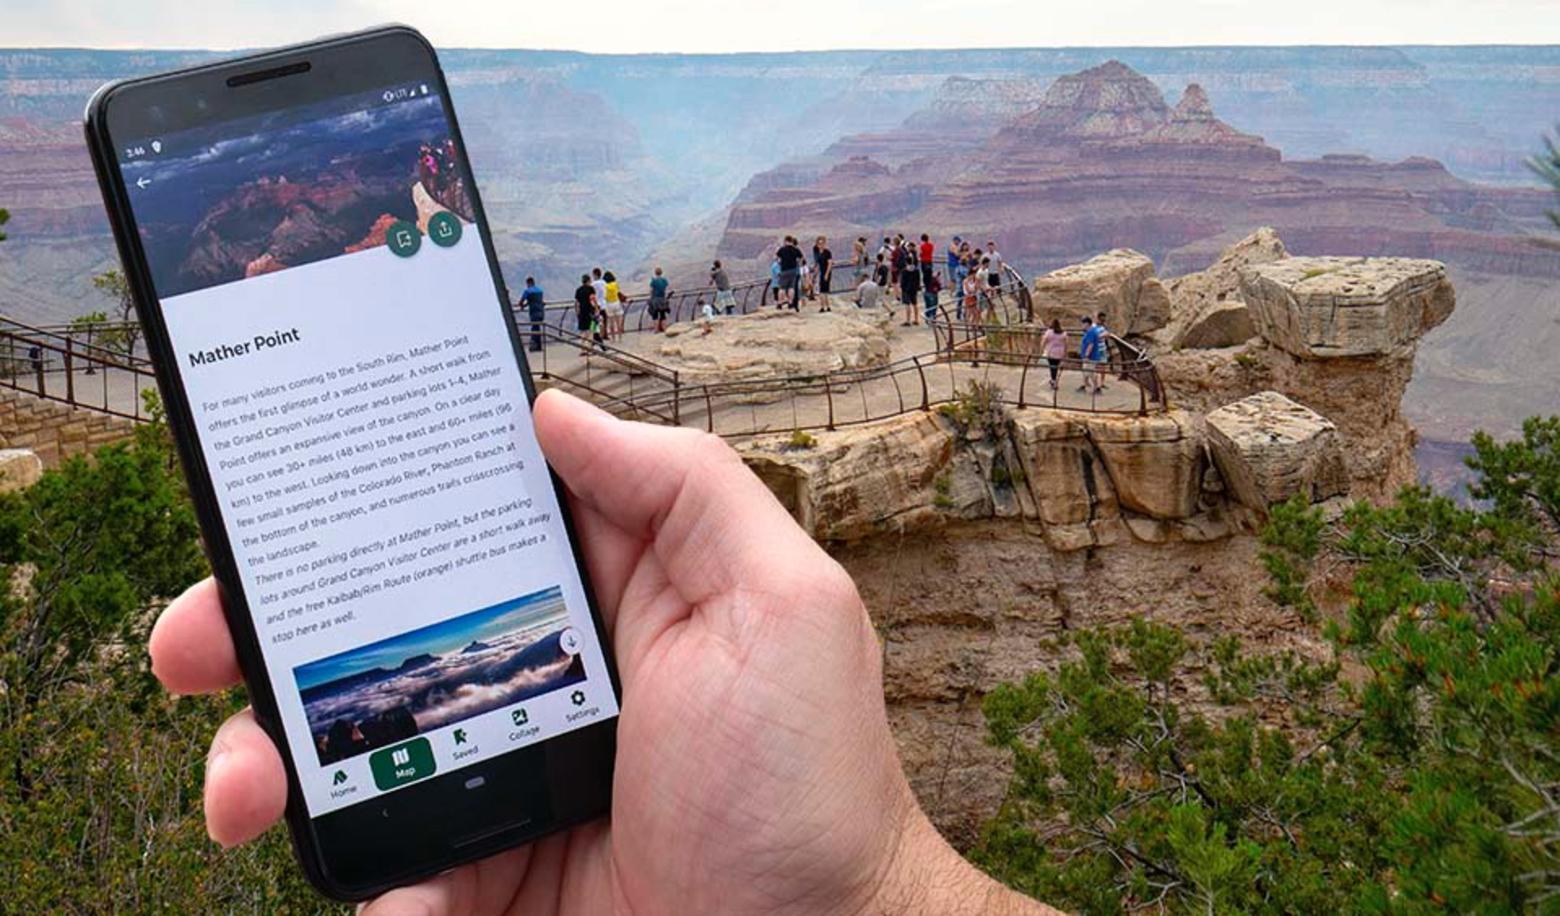 Grand Canyon touts its mobile phone app that allows visitors to learn more as they travel through the park. Photo courtesy M. Quinn/NPS